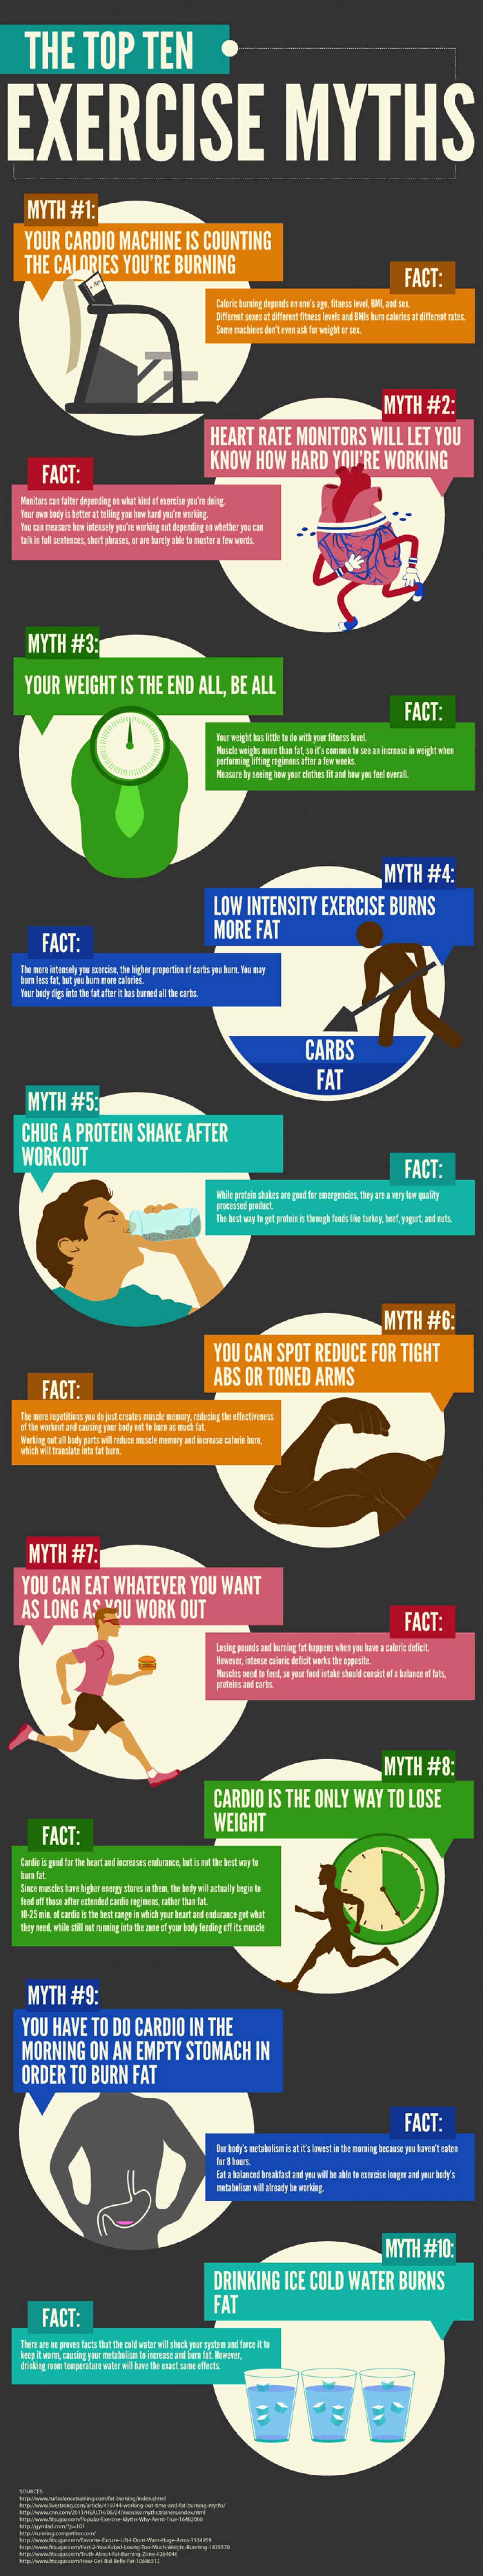 Exercise Myths Infographic